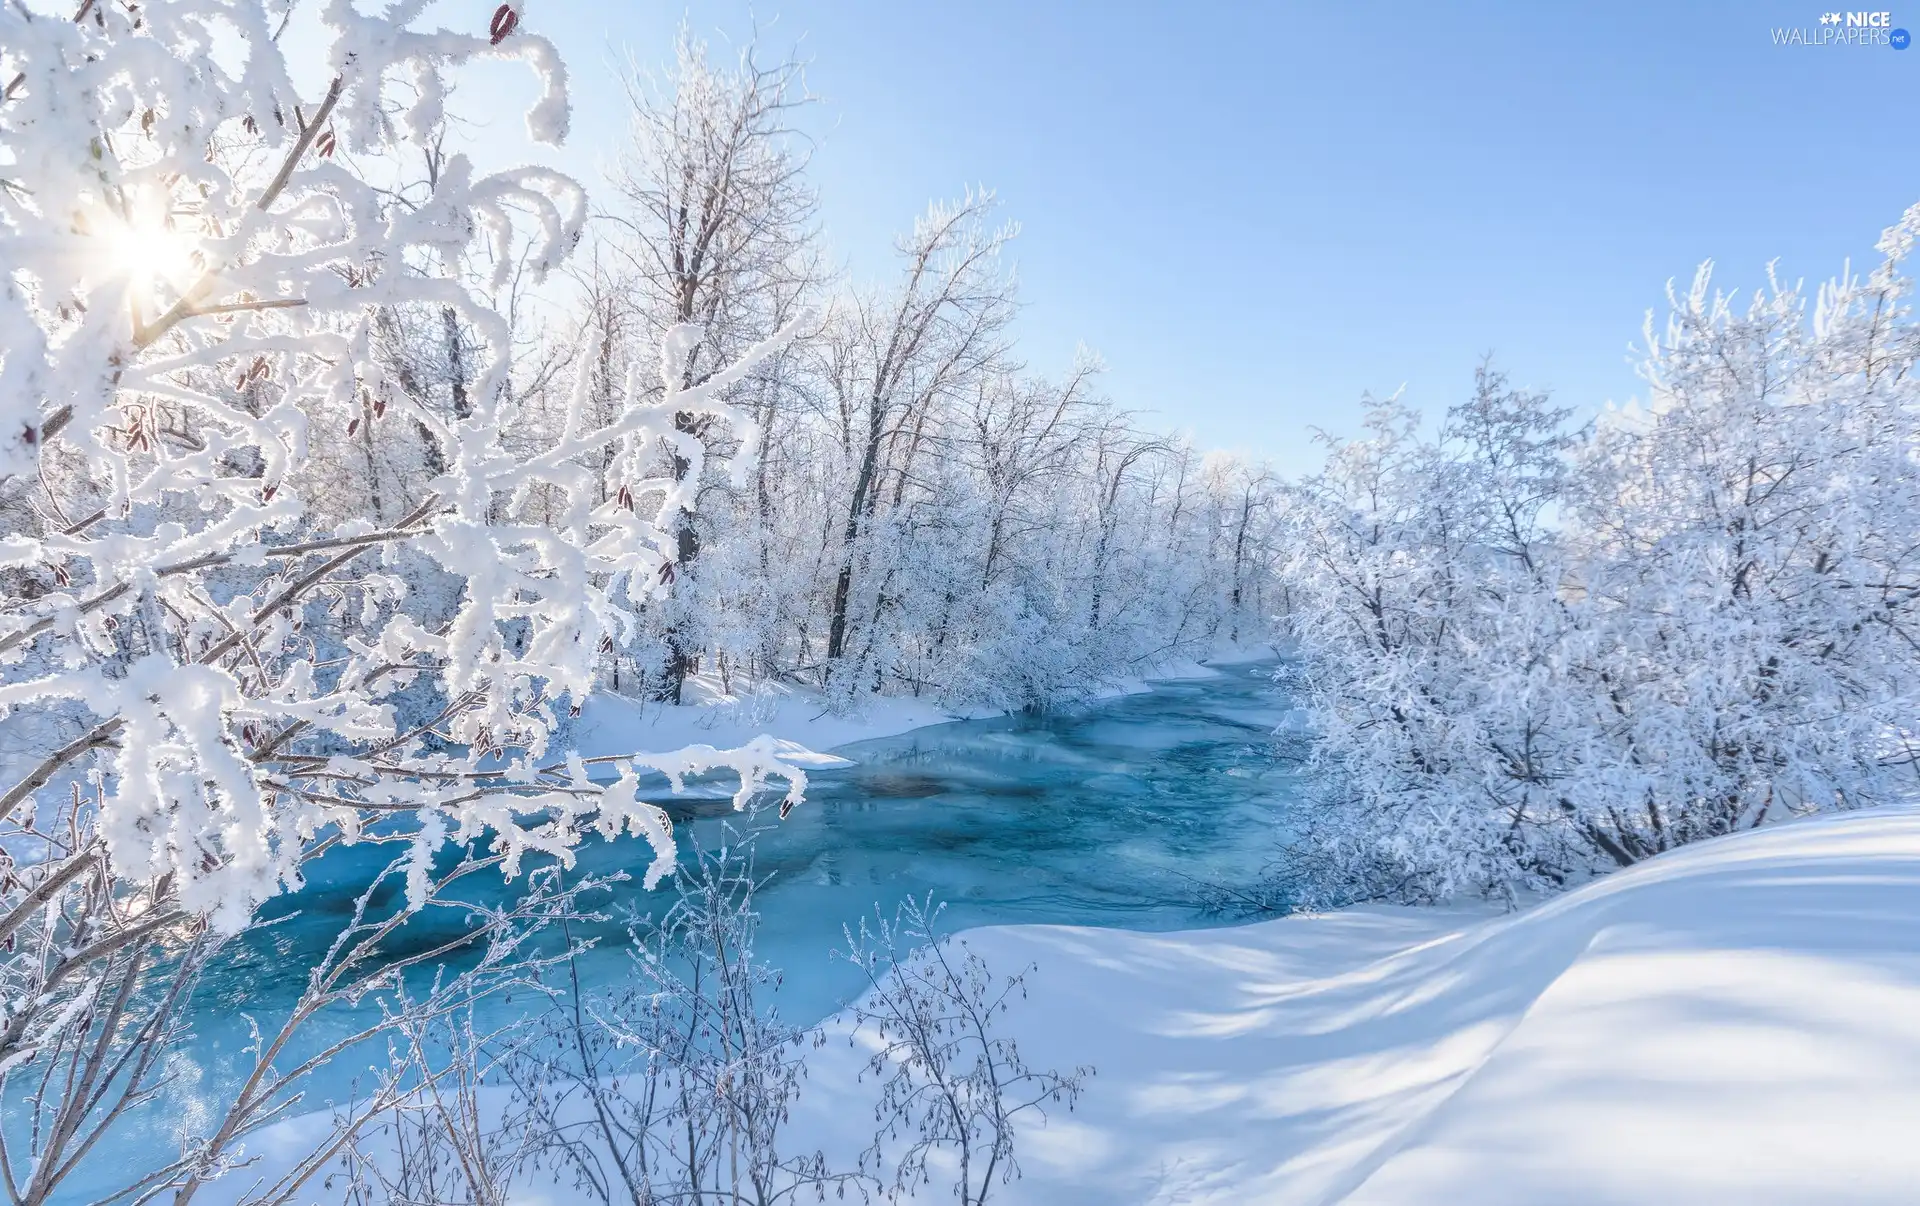 trees, River, branch pics, Snowy, winter, viewes, snow